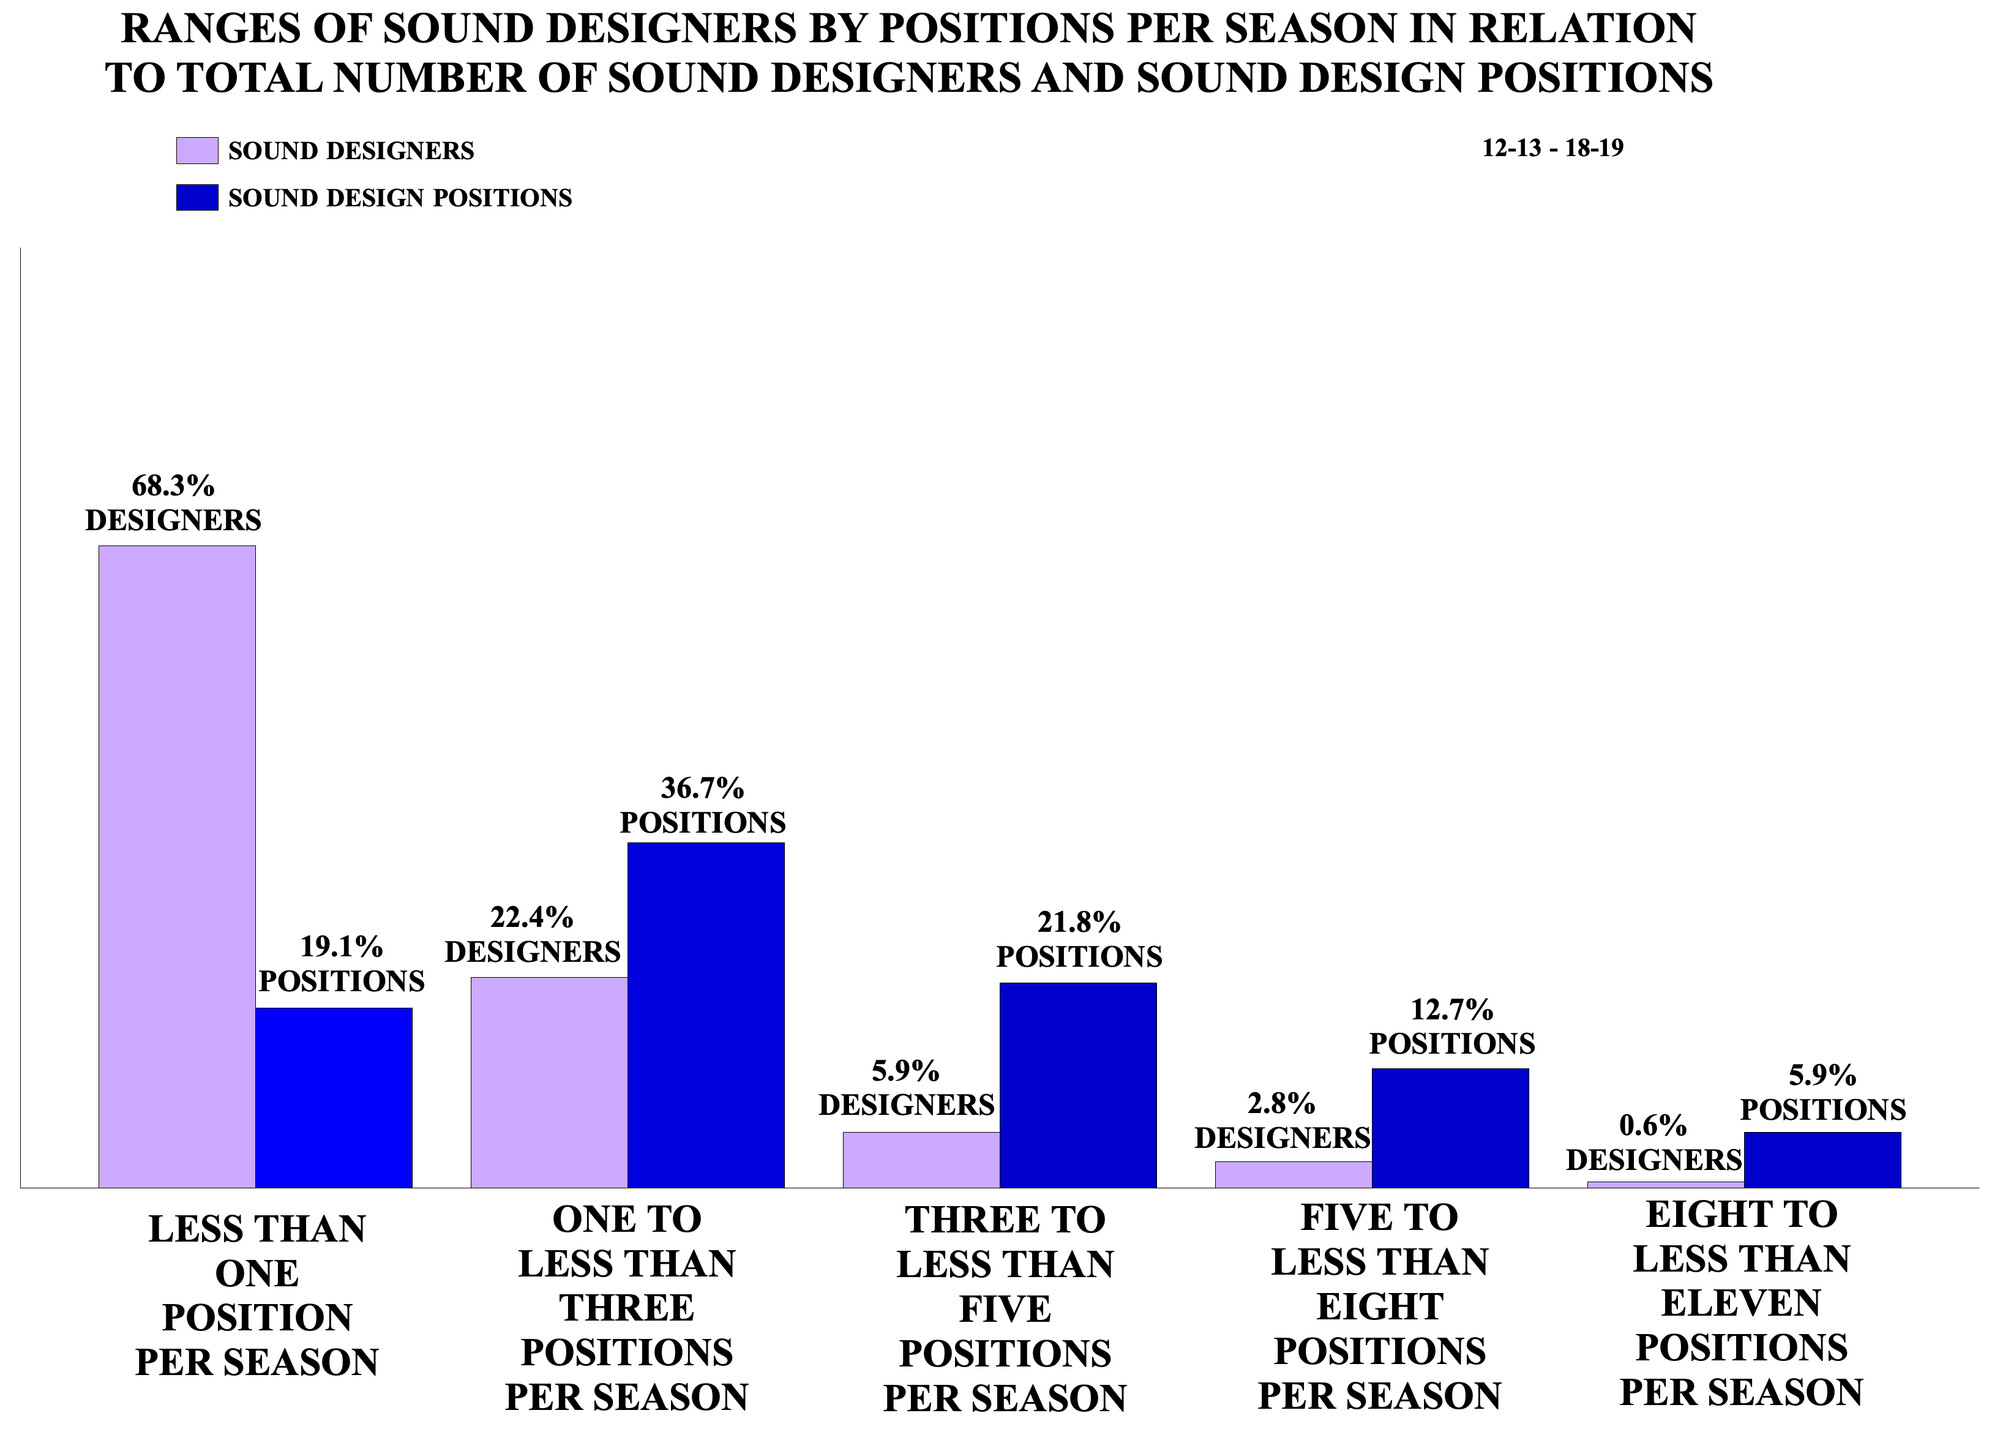 Ranges of Sound Designers by Positions Per Season in Relation to Total Number of Sound Designers and Sound Design Positions